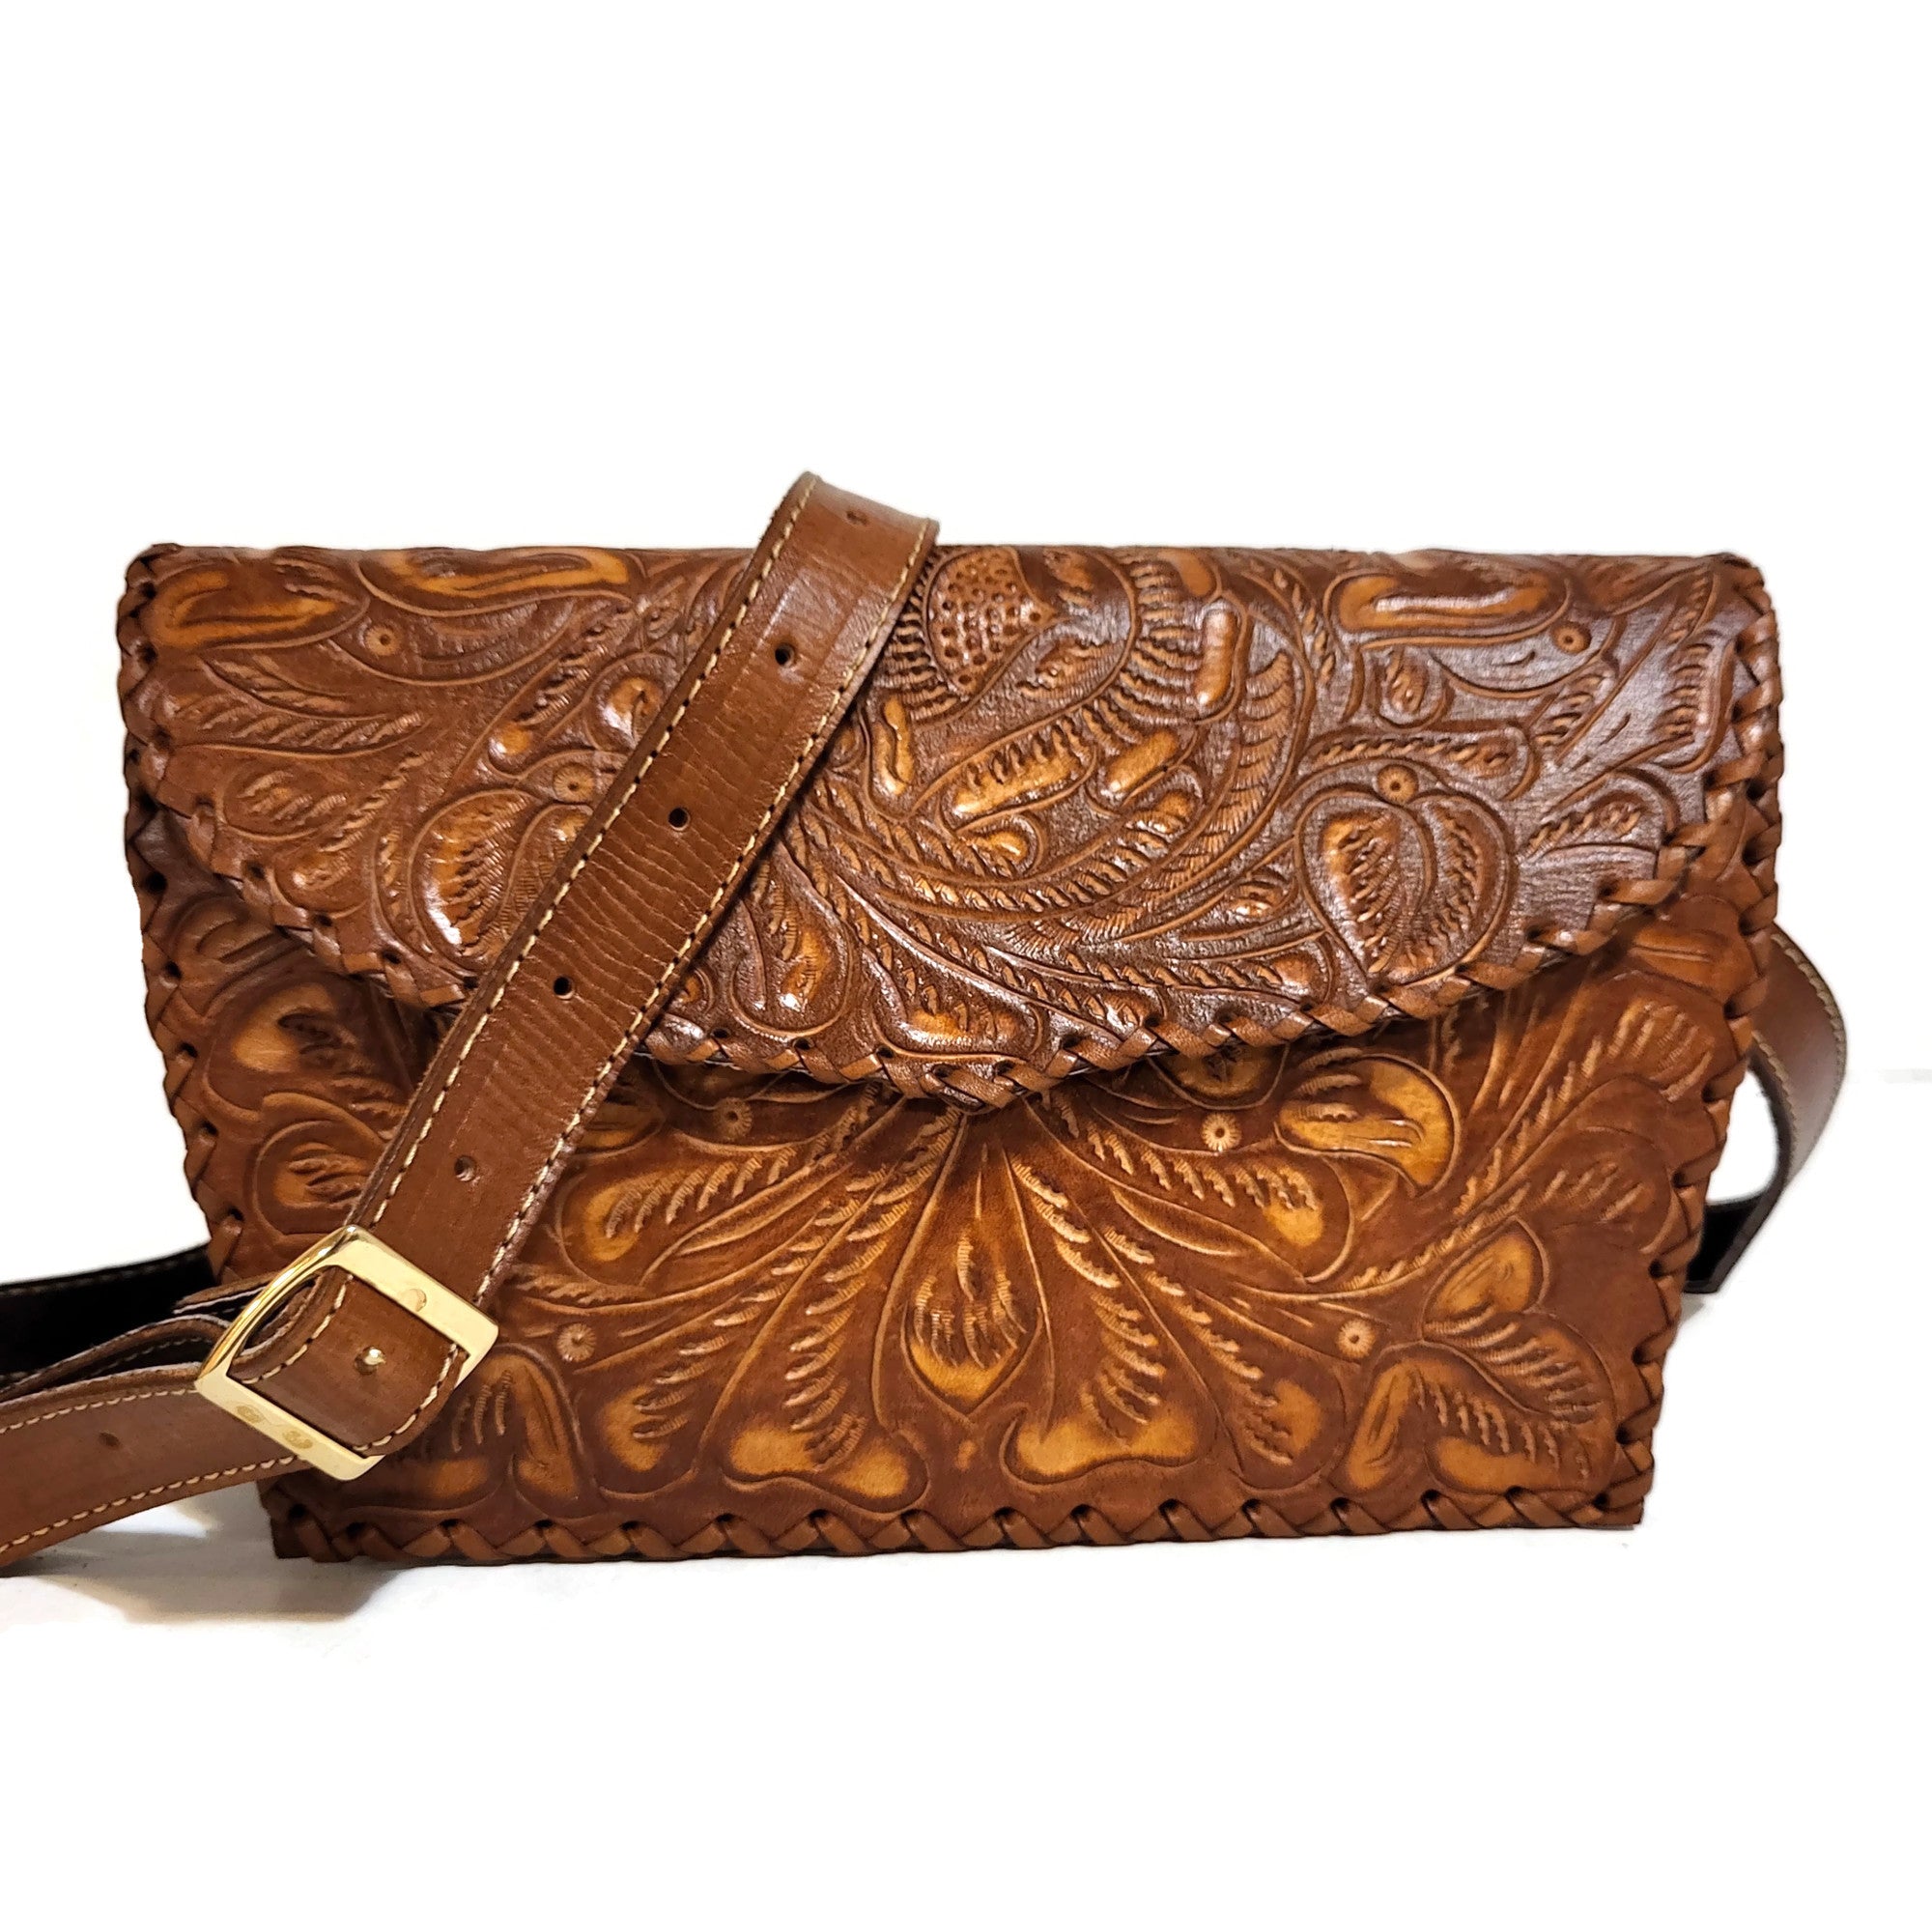 Hand tooled leather bag for women